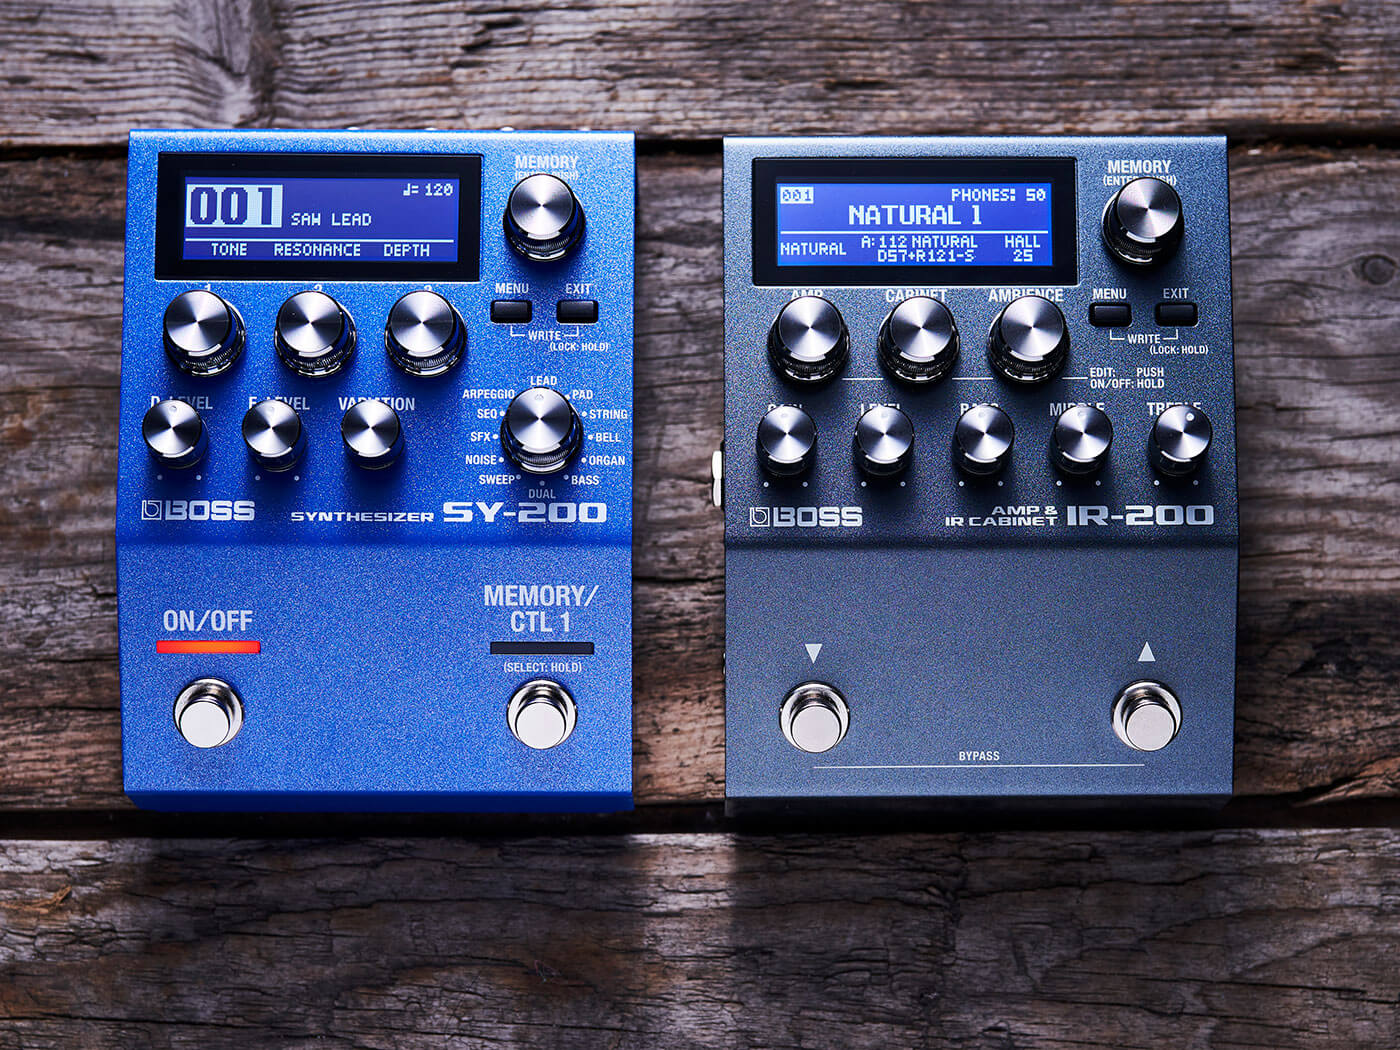 Boss unveils the IR-200 cab sim pedal and the SY-200 synth pedal